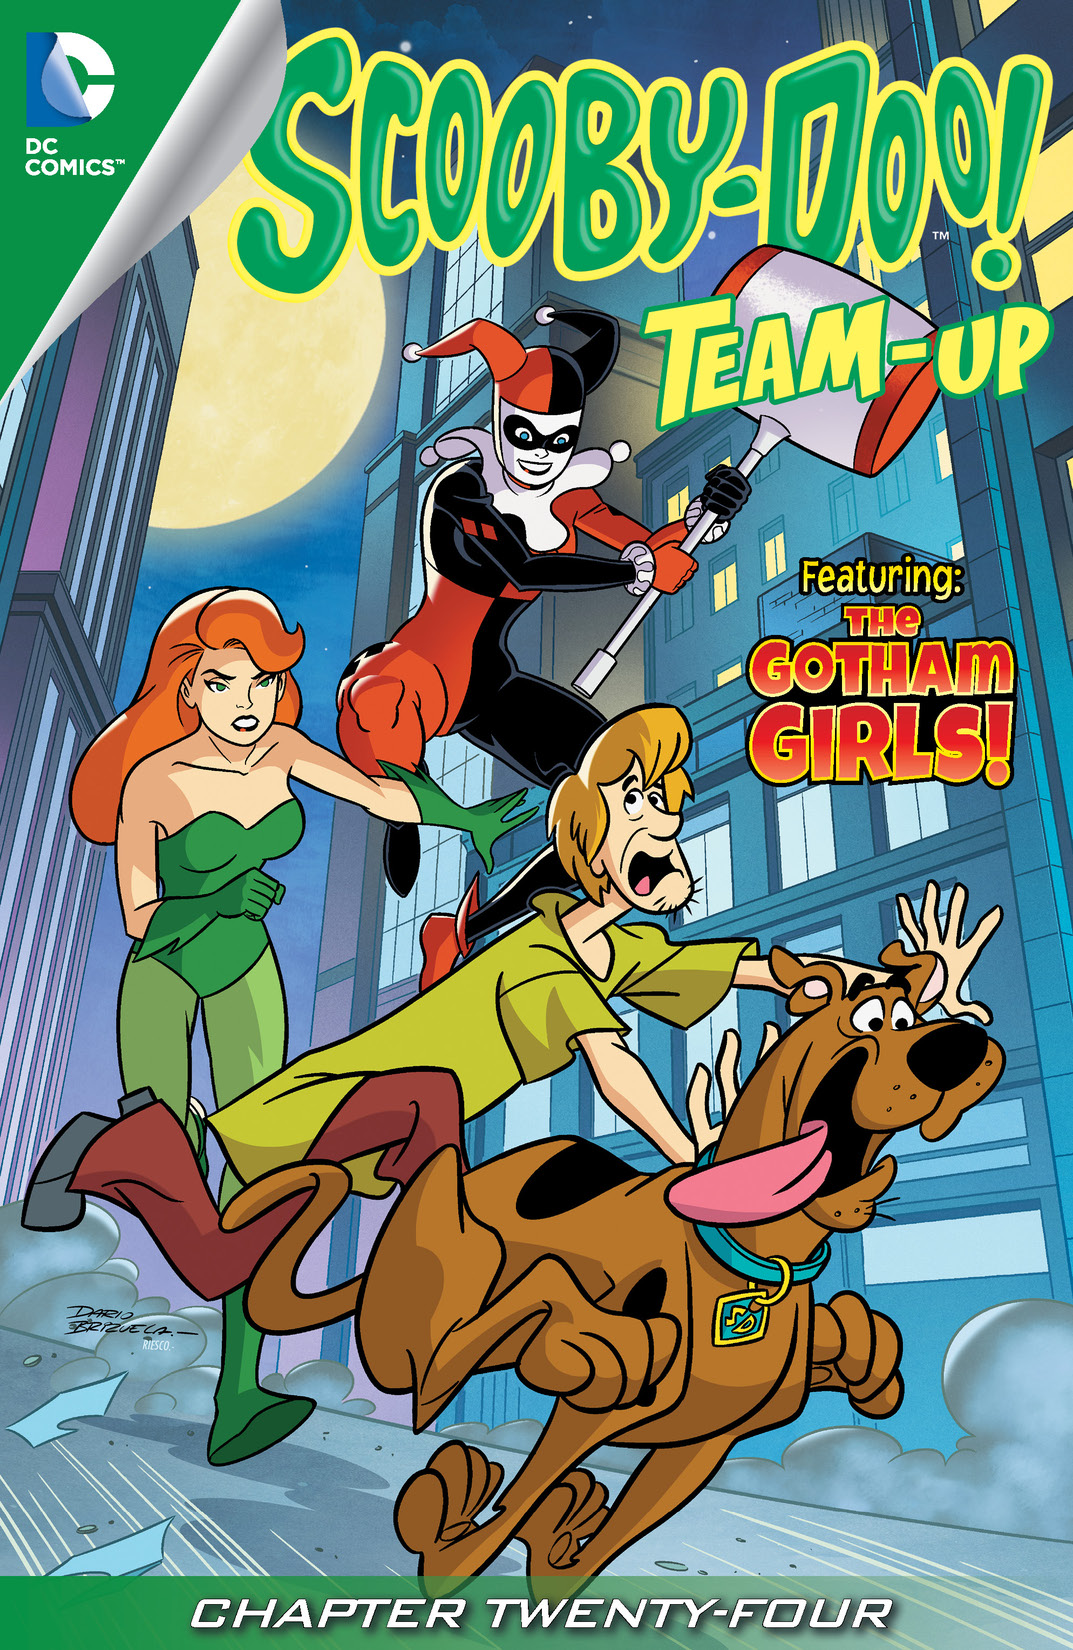 Scooby-Doo Team-Up #24 preview images